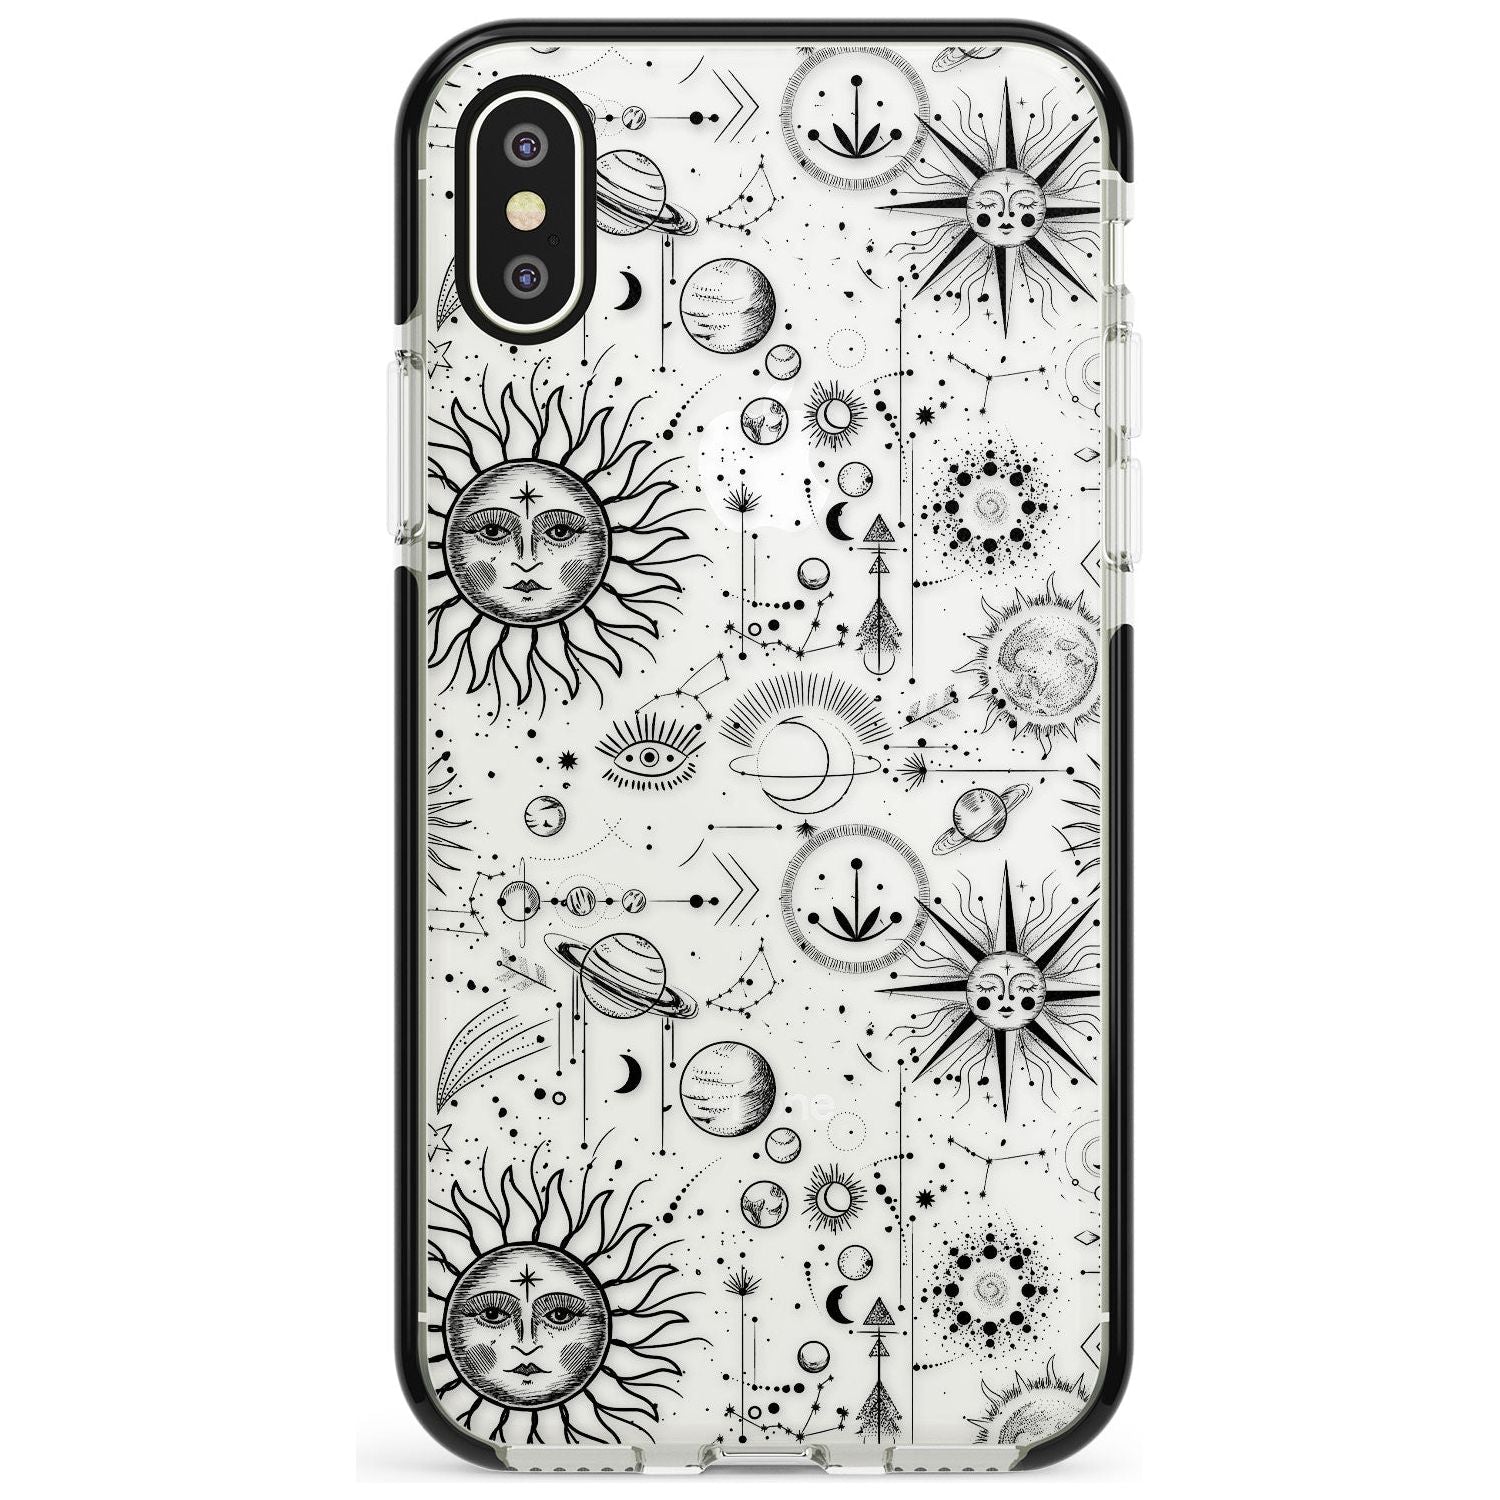 Suns & Planets Astrological Black Impact Phone Case for iPhone X XS Max XR